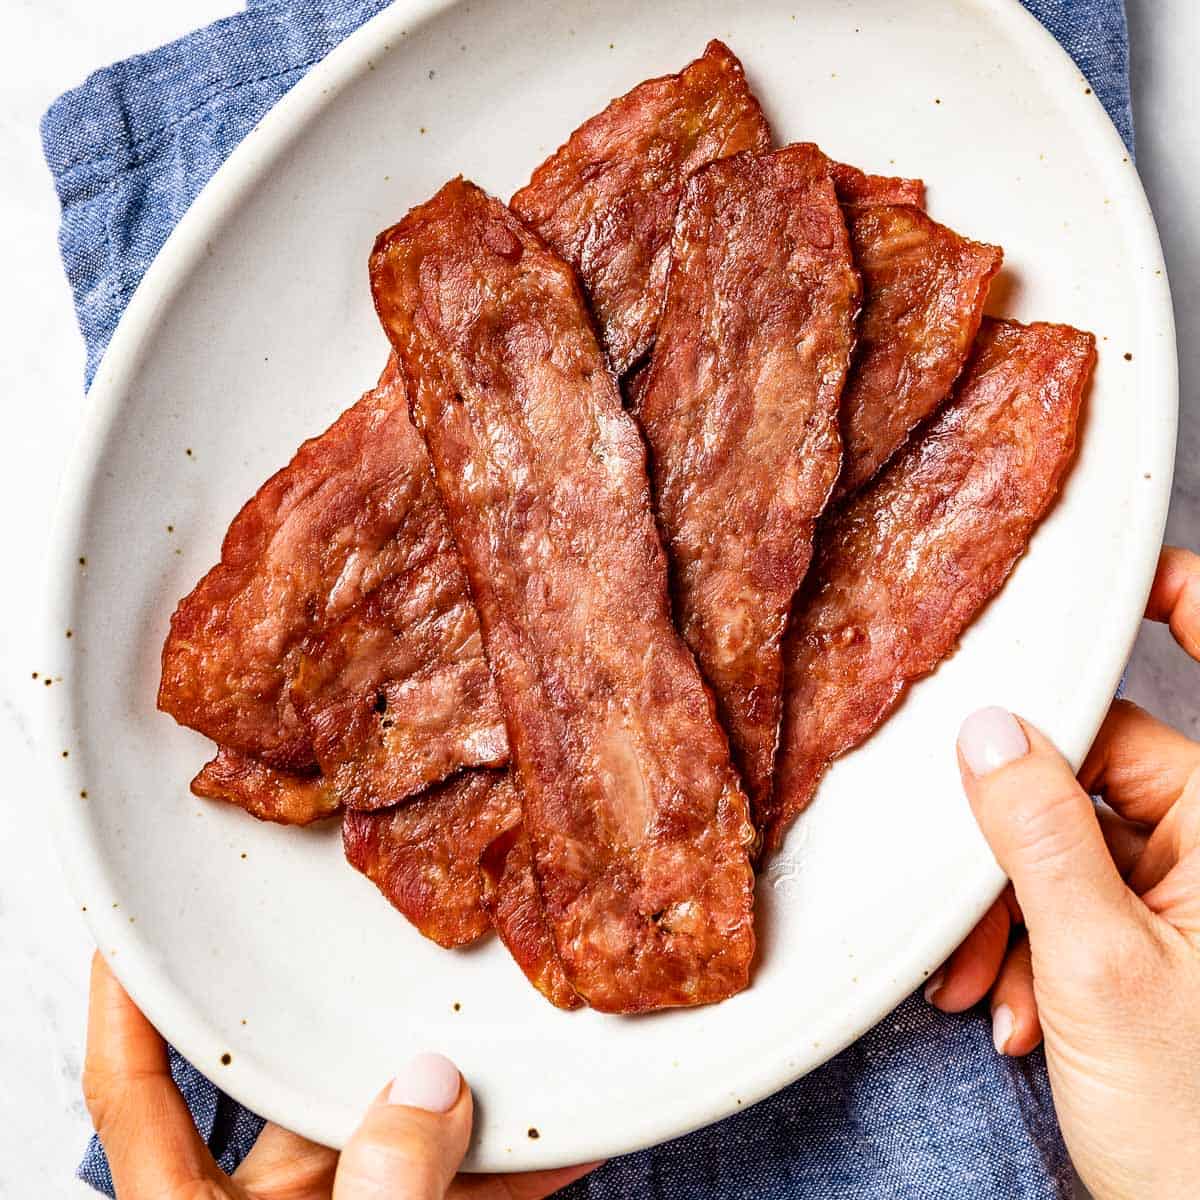 https://foolproofliving.com/wp-content/uploads/2022/02/How-to-cook-turkey-bacon-in-the-oven-recipe.jpg